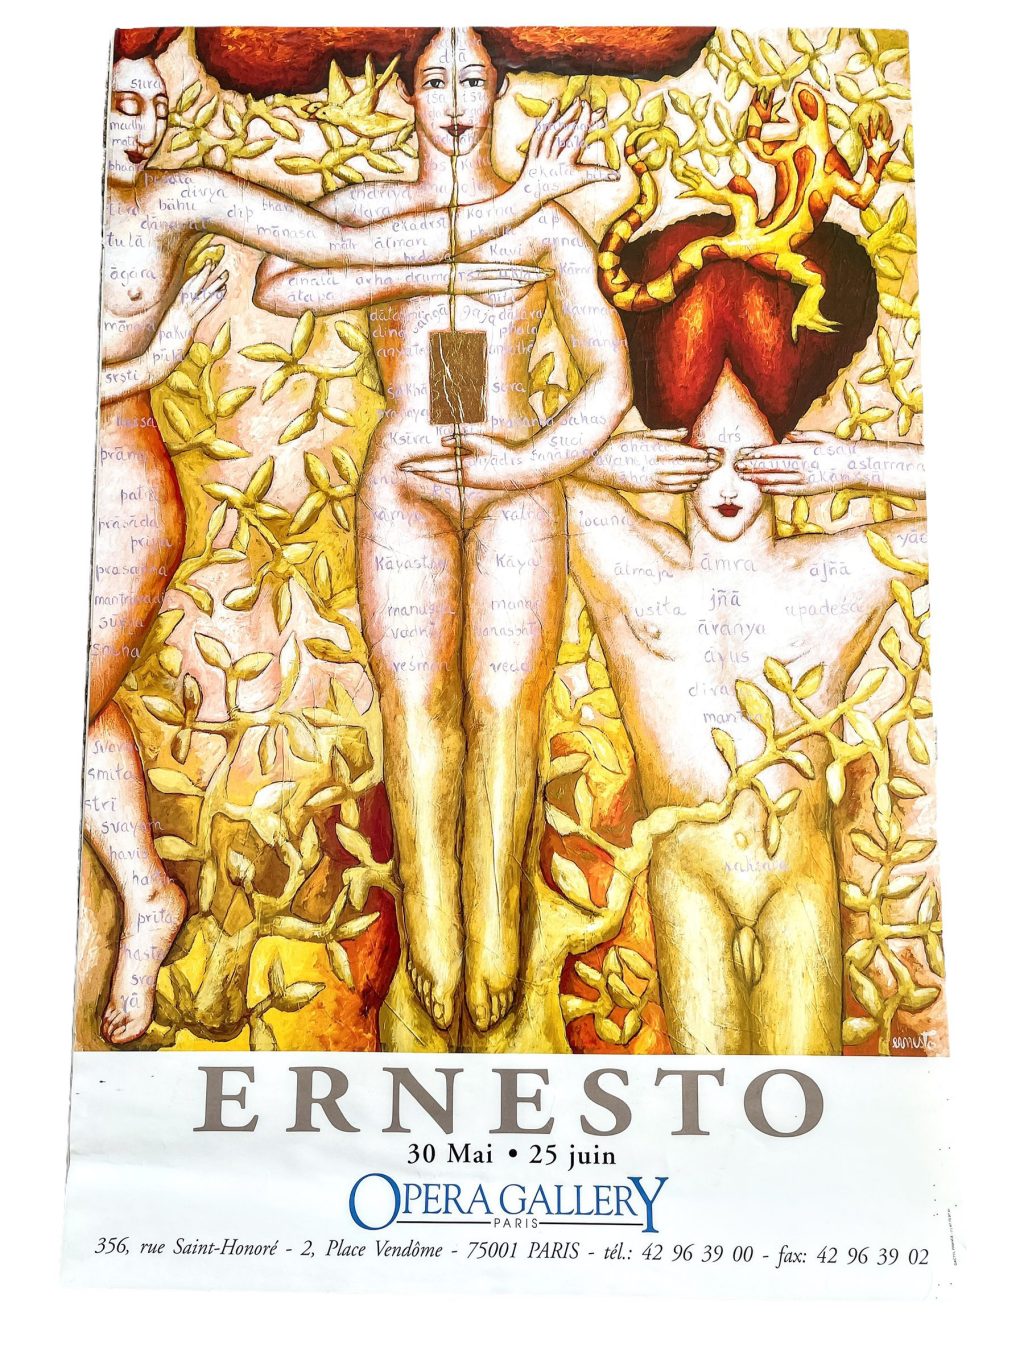 Vintage French Ernesto Opera Gallerie Paris Gallery Original Exhibition Poster Wall Decor Painting Display Artwork c1990’s / EVE